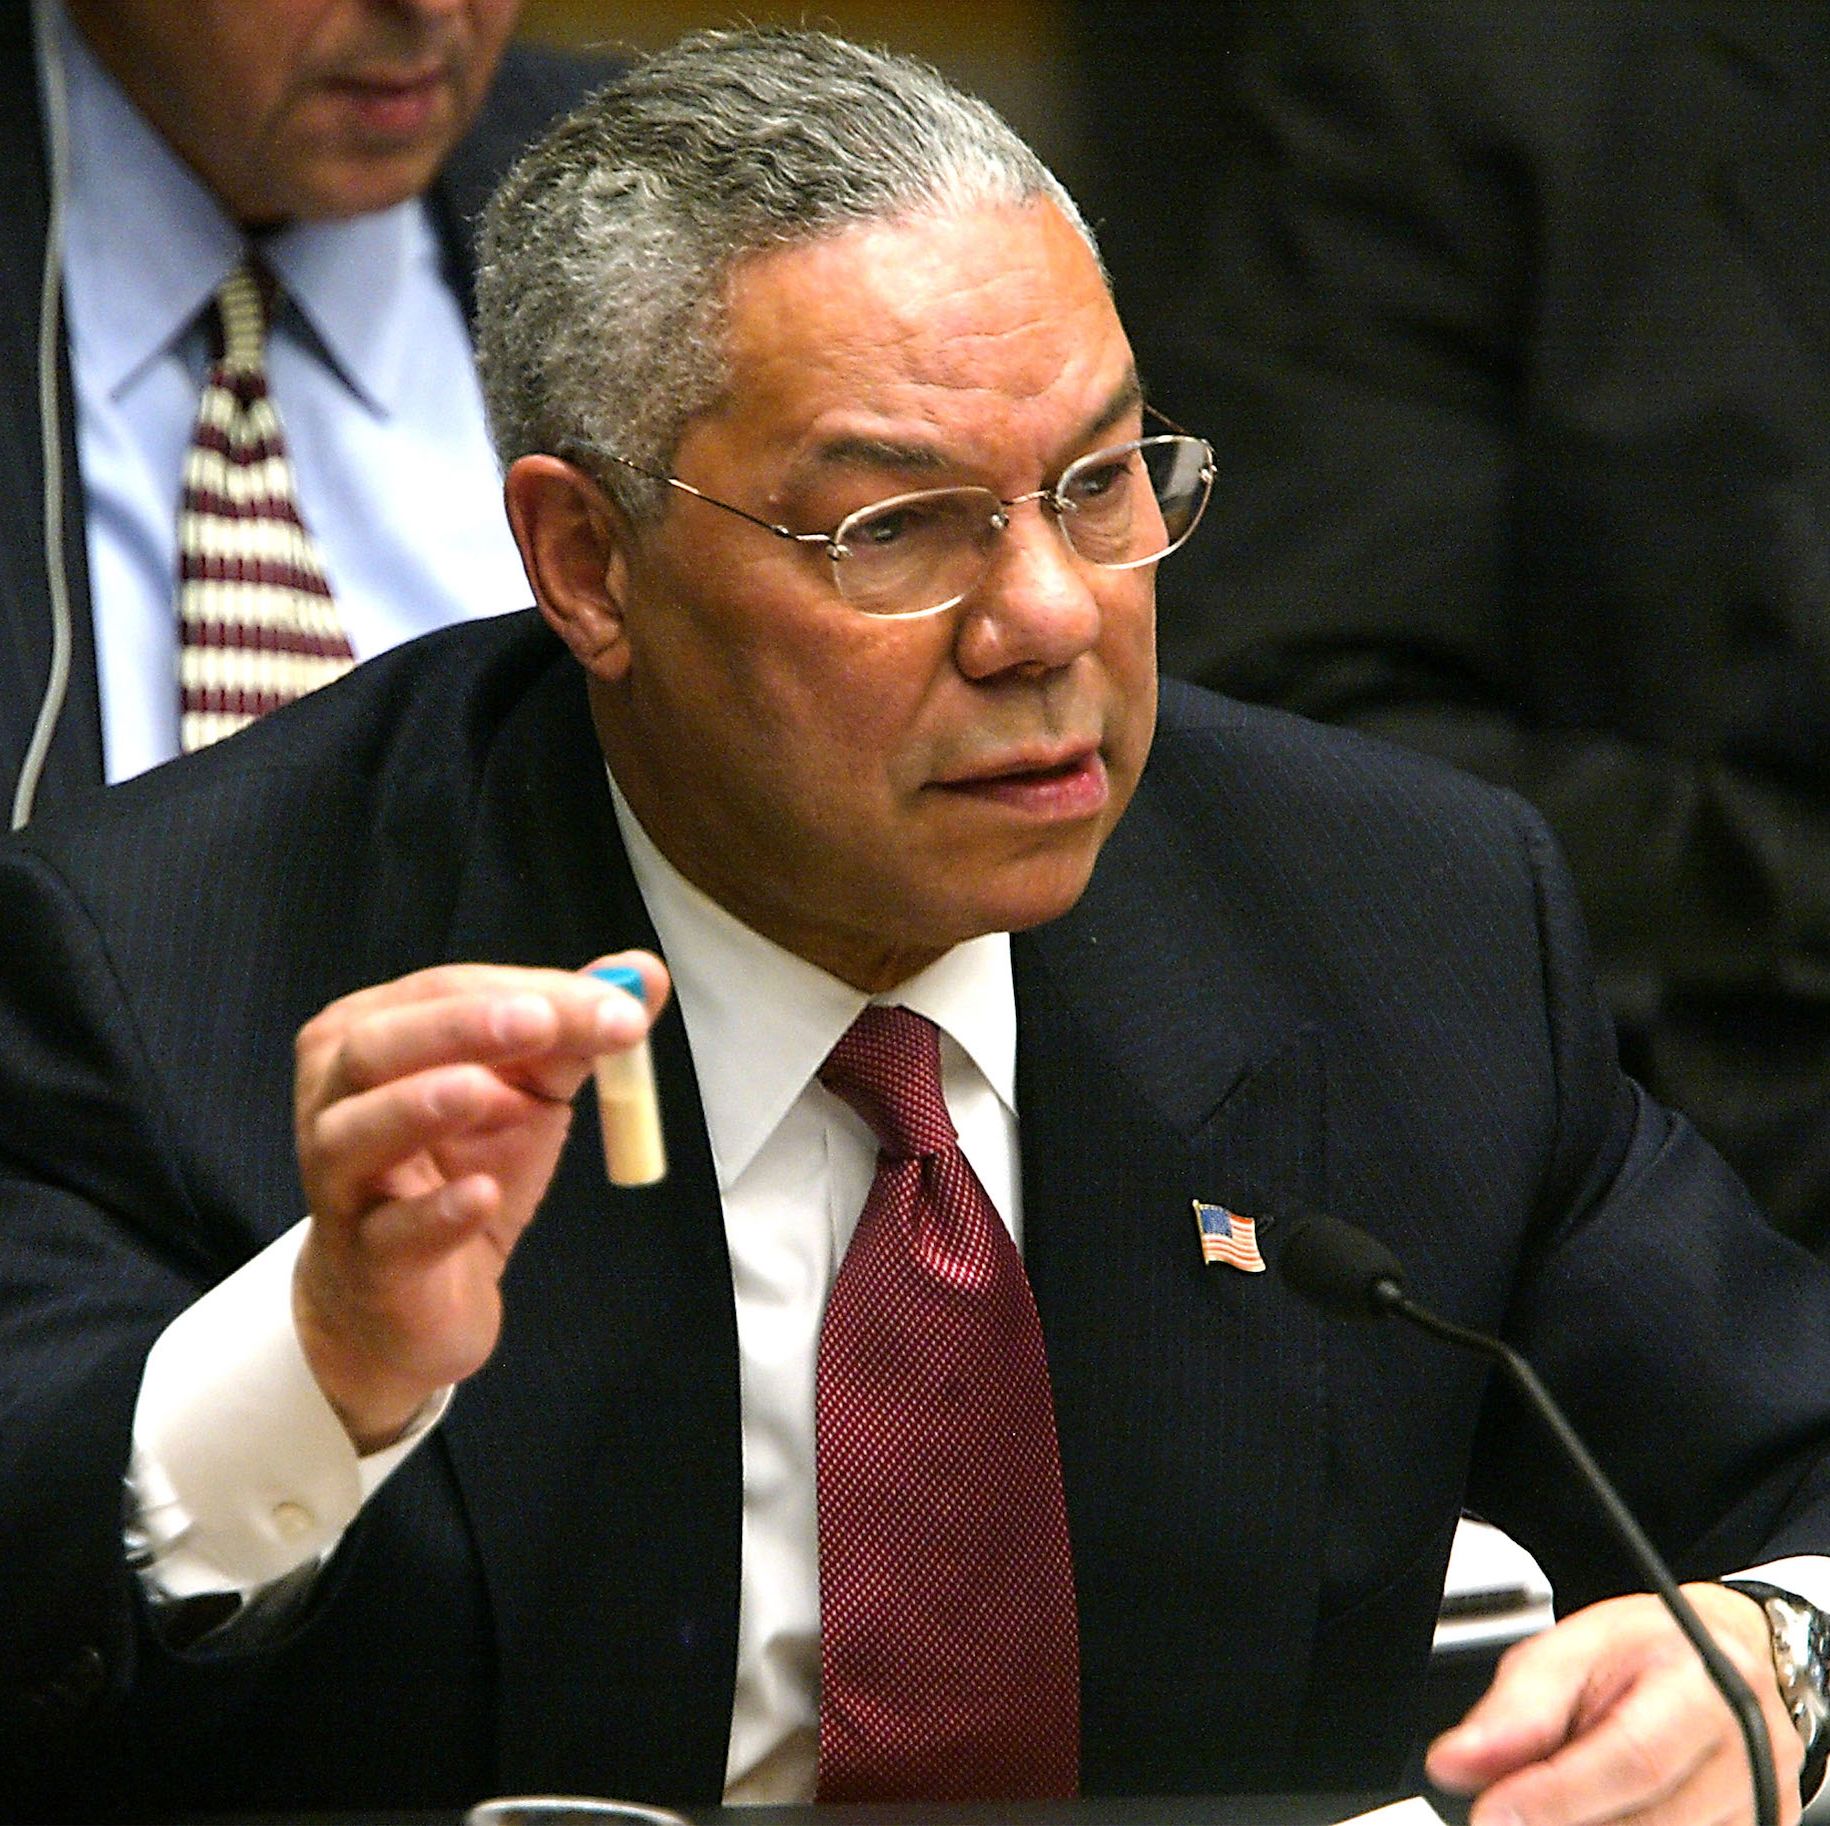 Colin Powell Had the Chance to Be a Great Man in a Crucial Moment. He Chose to Be a Loyal Apparatchik.